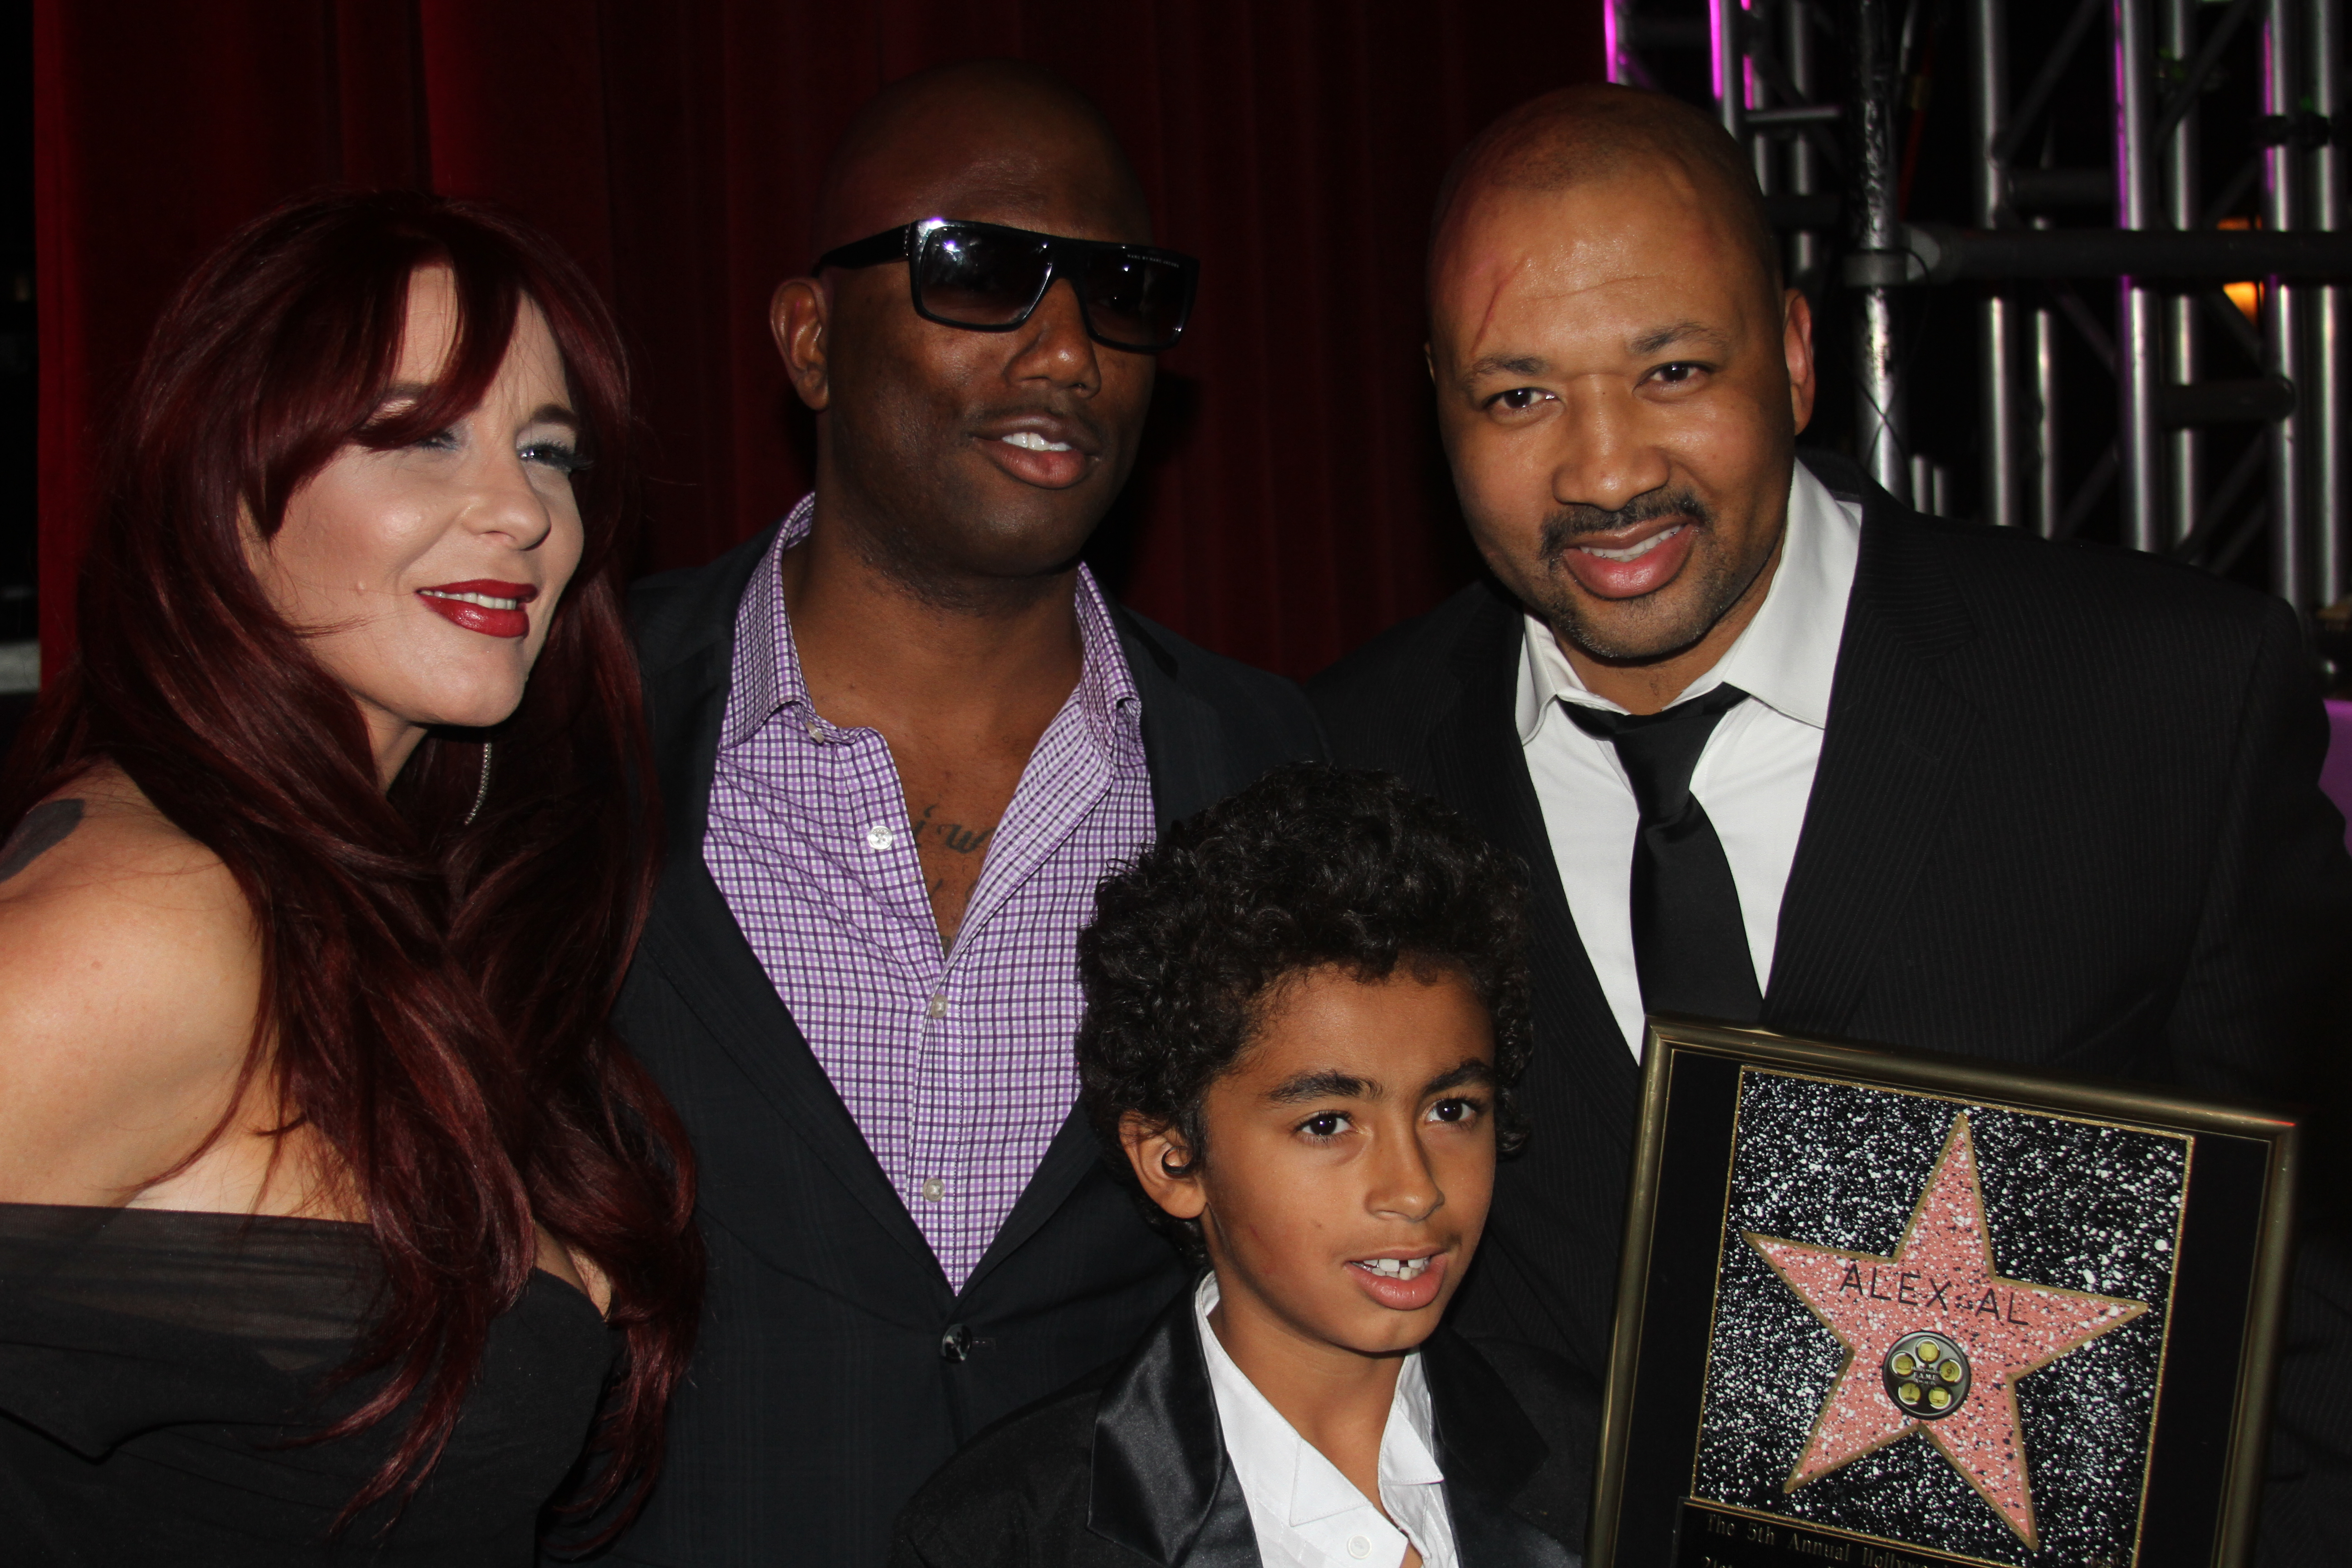 Alex Al receives Lifetime Achievement award as musician at Hollywood Fame Awards with a big congratulation from vocalist T.J Gibson and the James Brown family.